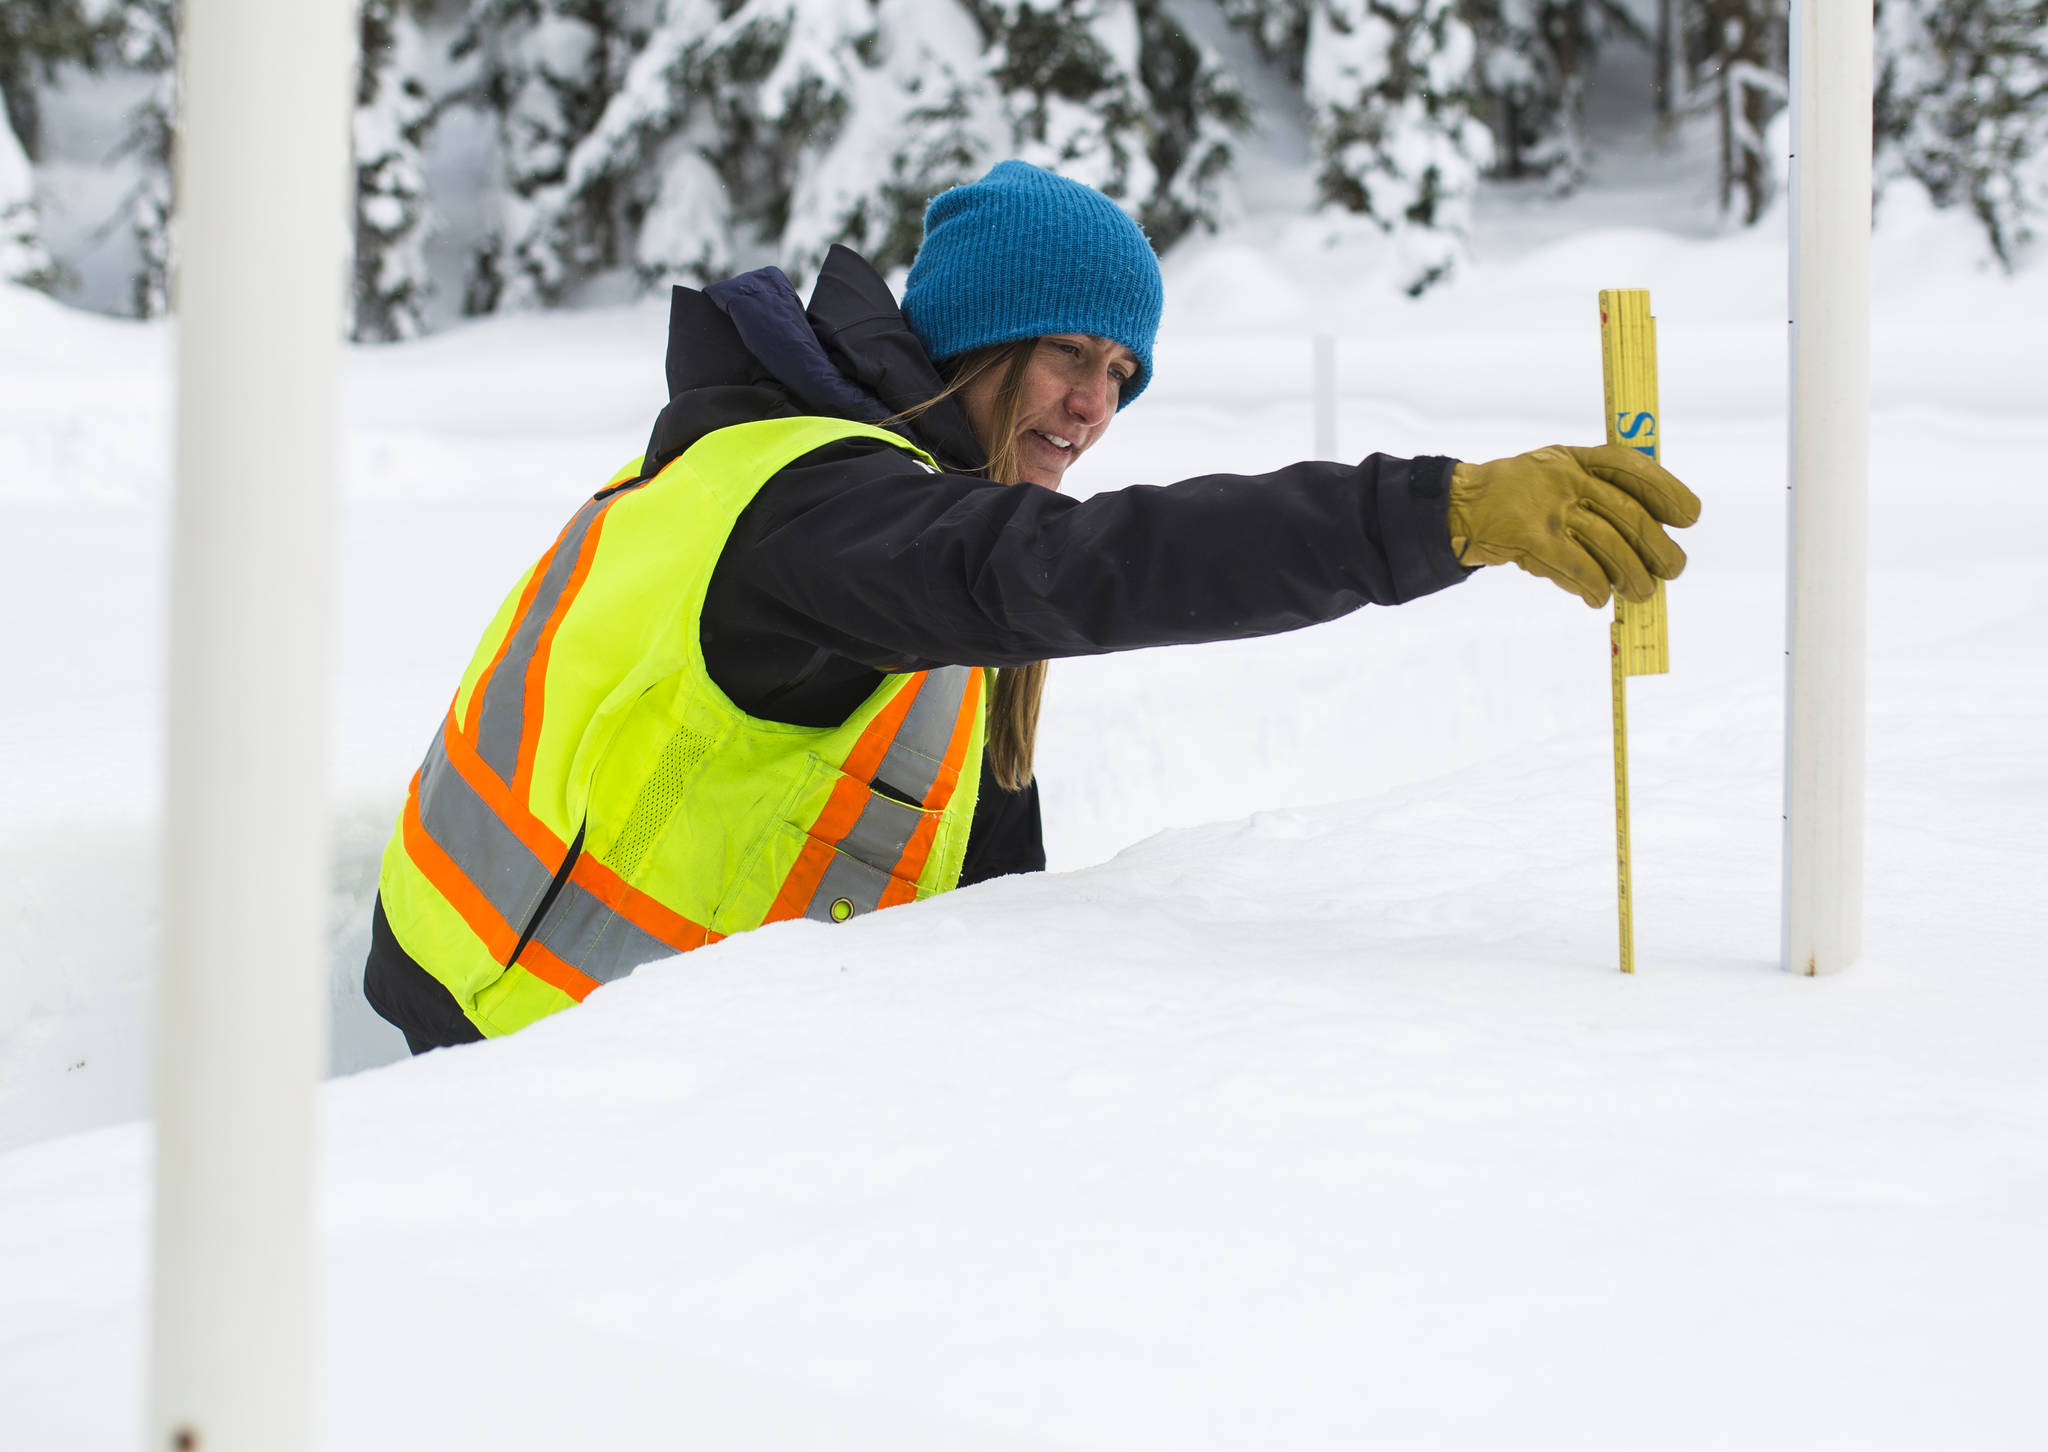 11269718_web1_180306-RTR-avalanche-parks-canada19